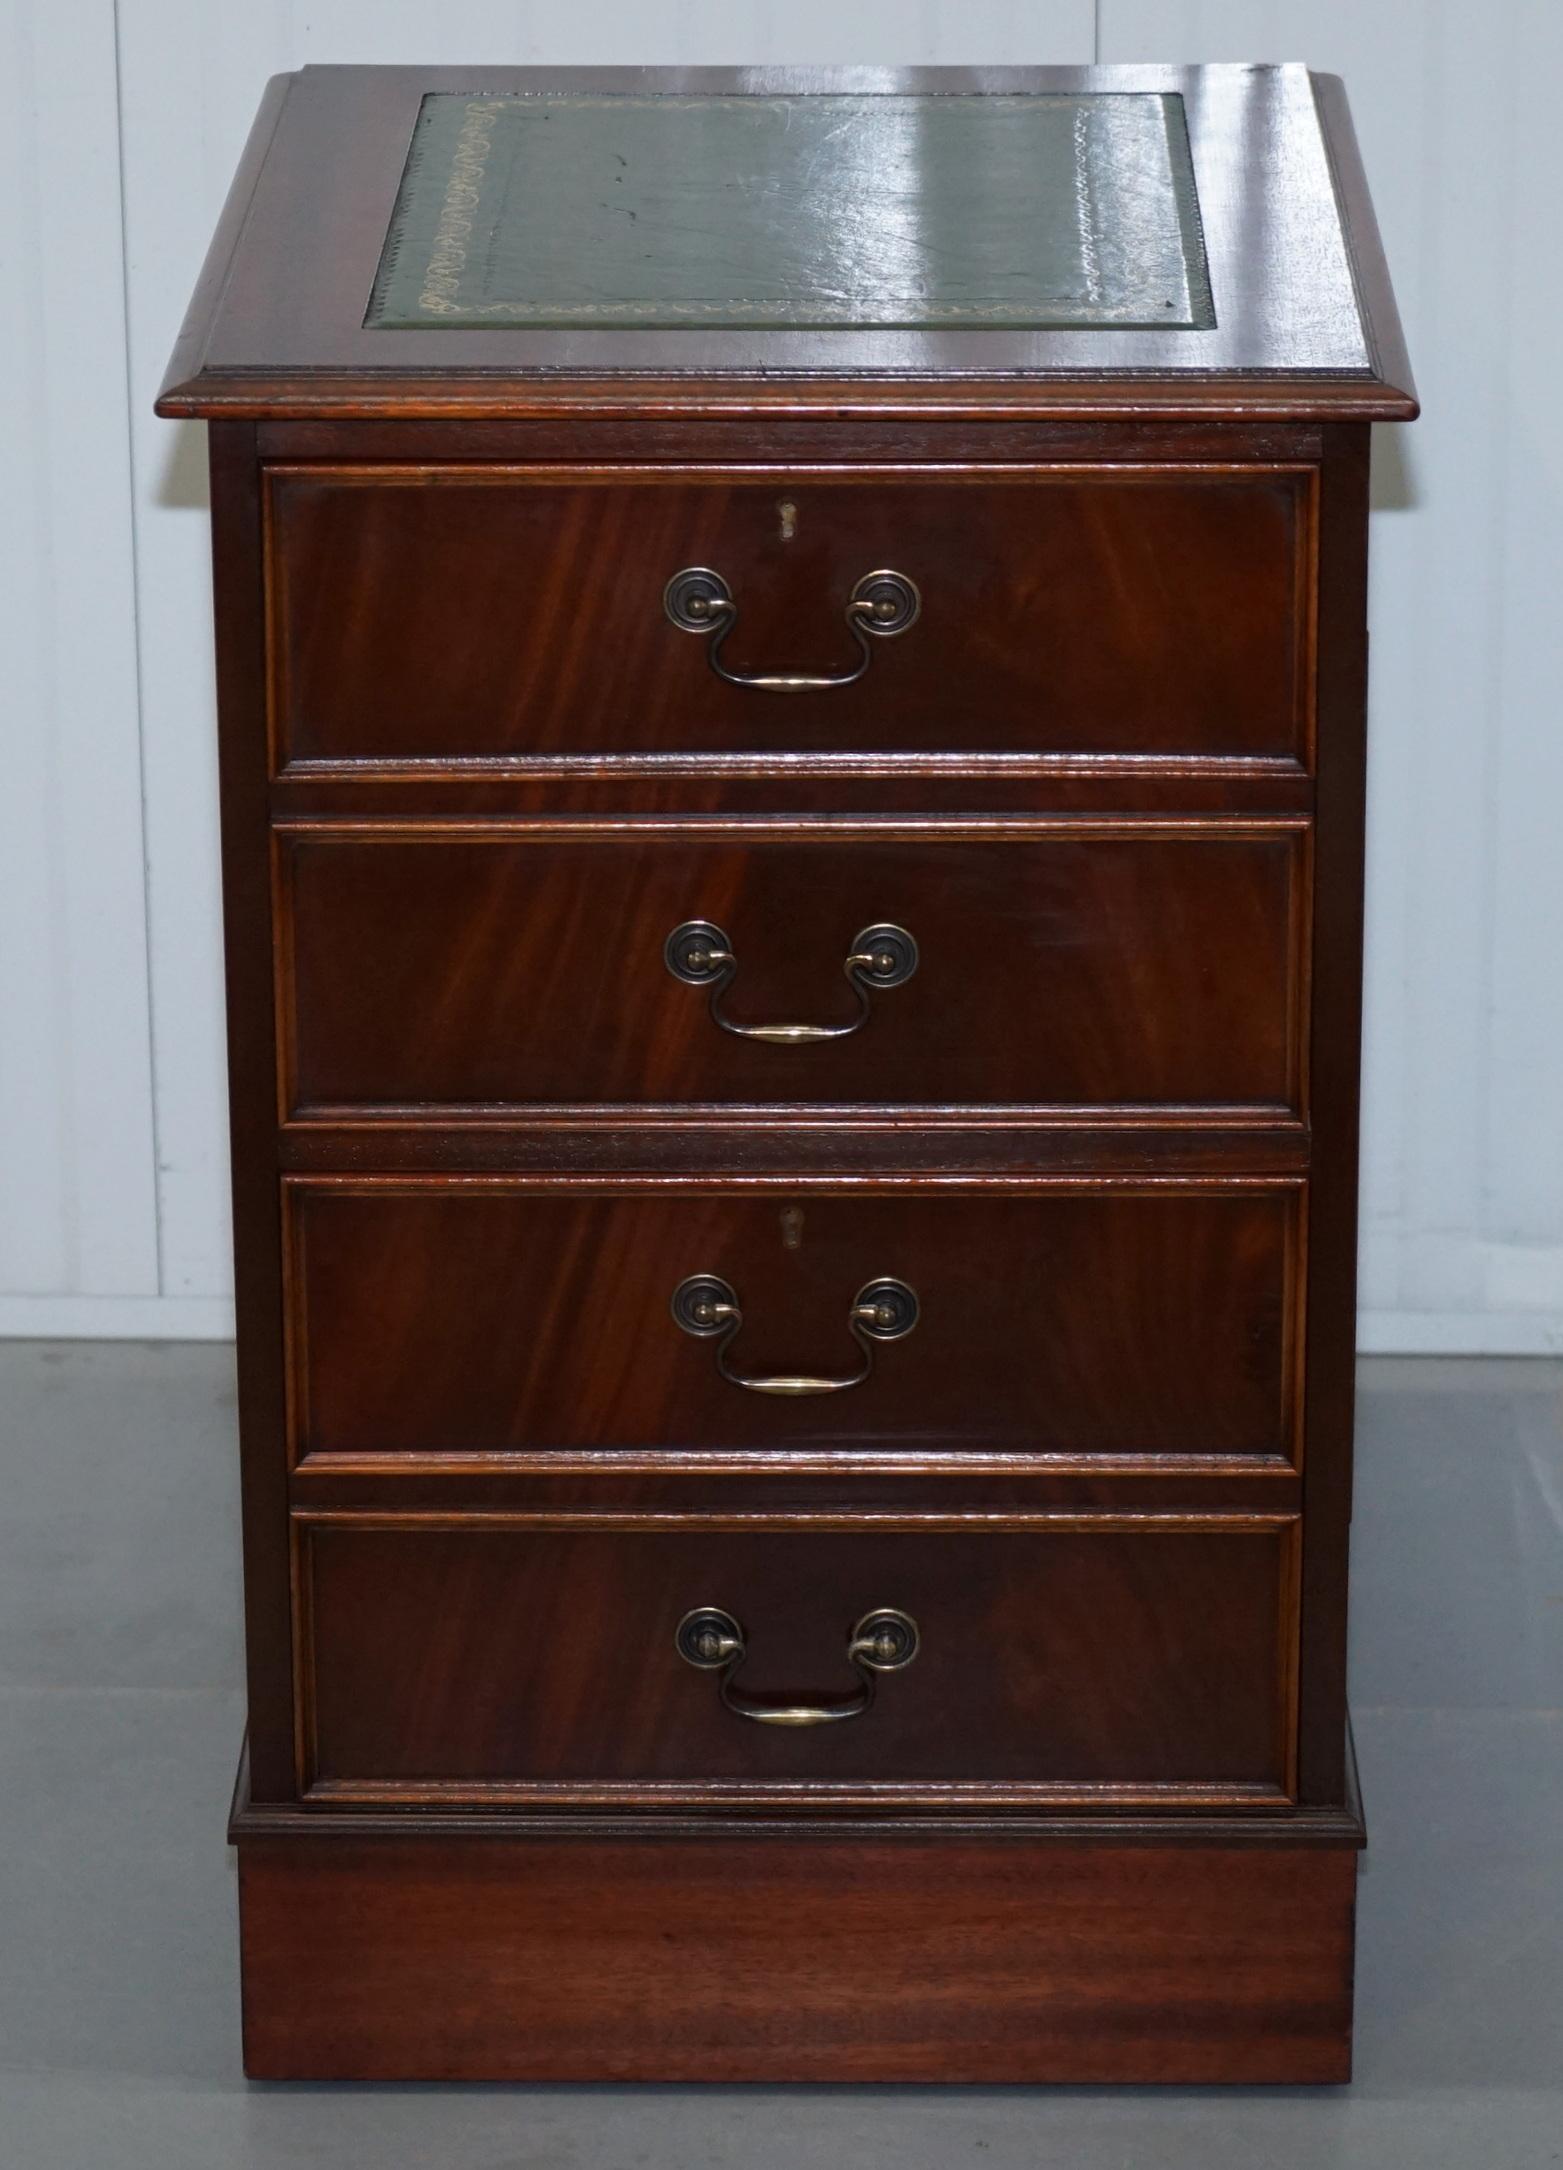 We are delighted to offer for sale this lovely Mahogany with green leather writing surface filing cabinet

The green leather writing surface is gold tooled and it has a nice vintage patina to it as does the mahogany frame which is very heavy

In